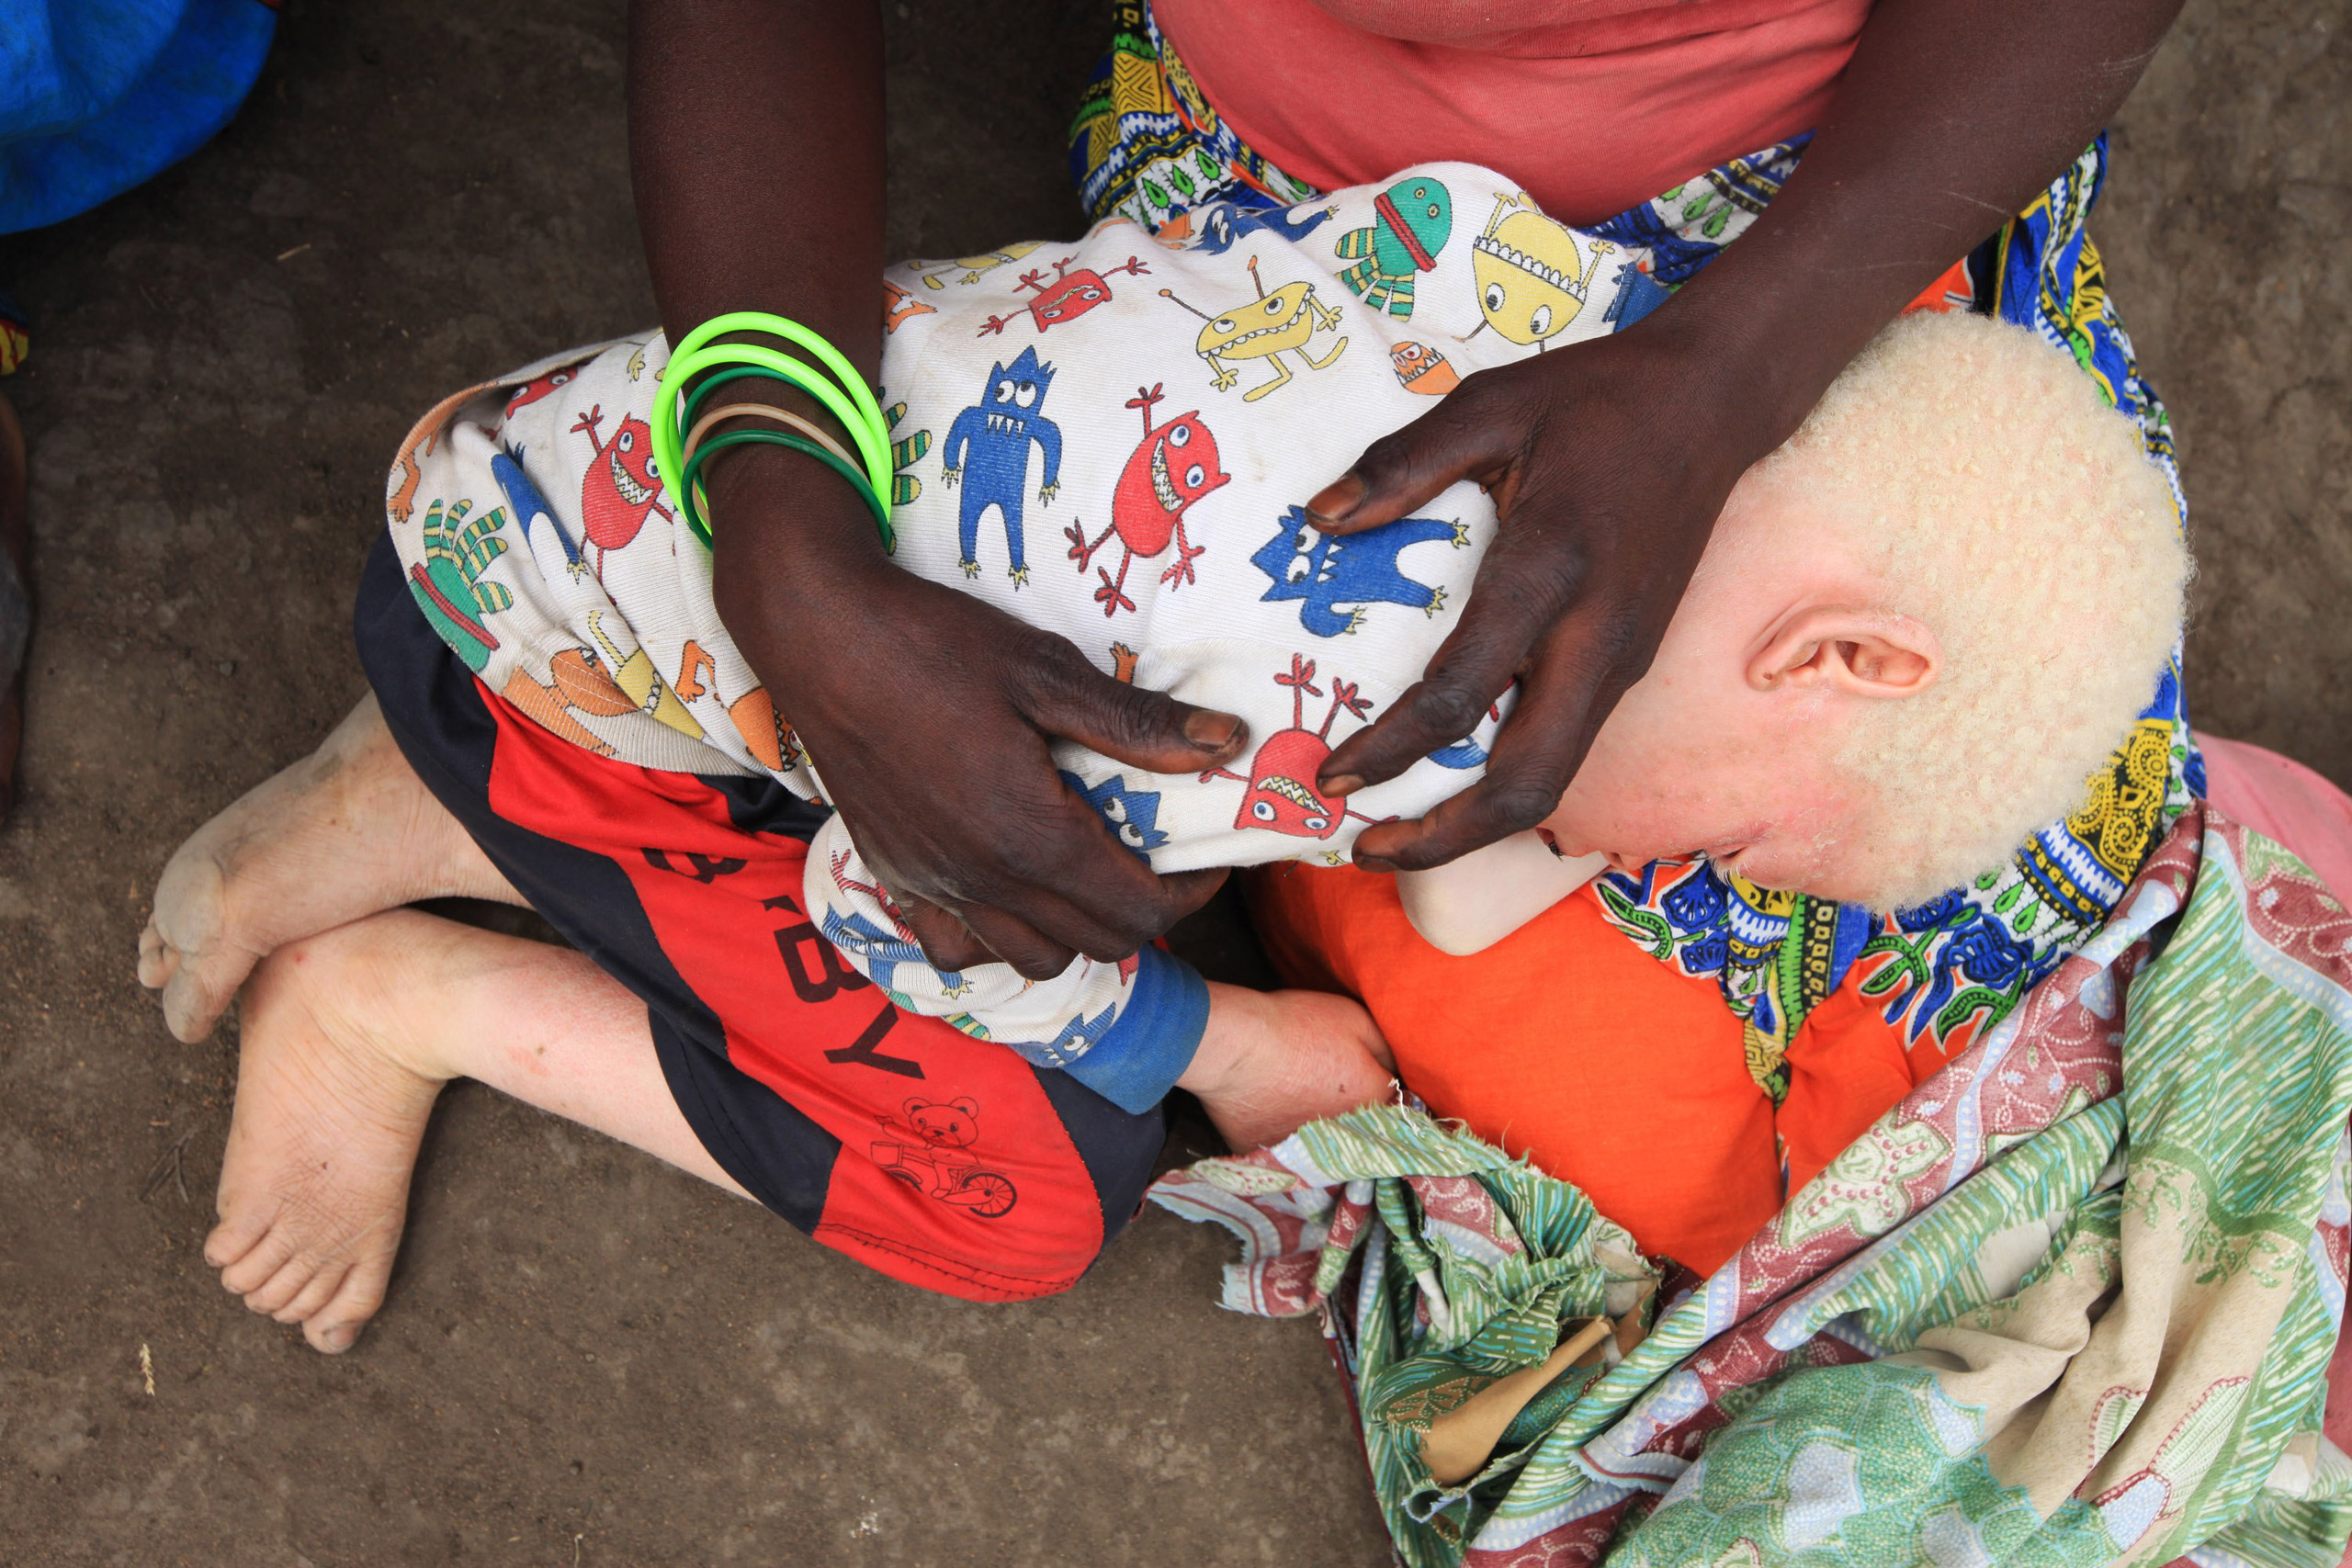 Edna Cedrick, 26, holds her surviving albino son after his twin brother who had albinism was snatched from her arms,  in Machinga north east of Blantyre, Malawi, May, 24, 2016. (Tsvangirayi Mukwazhi—AP)